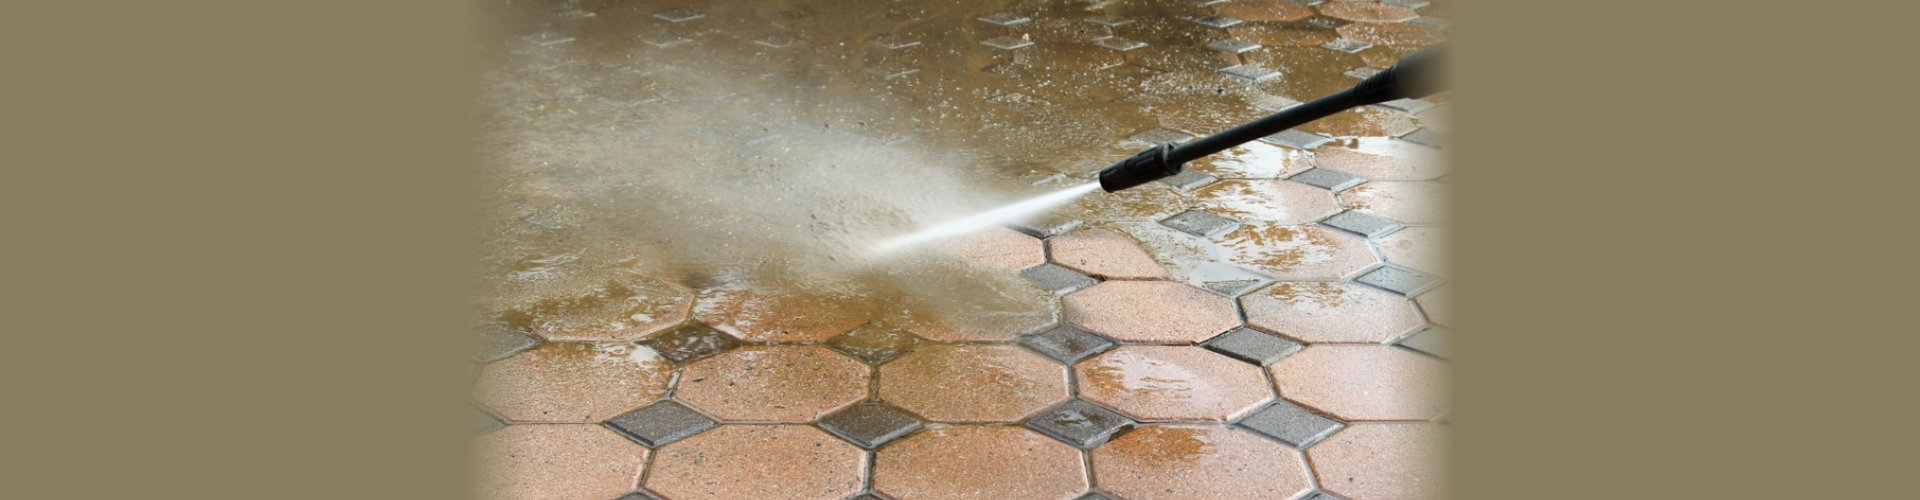 cleaning dirt using pressurized water